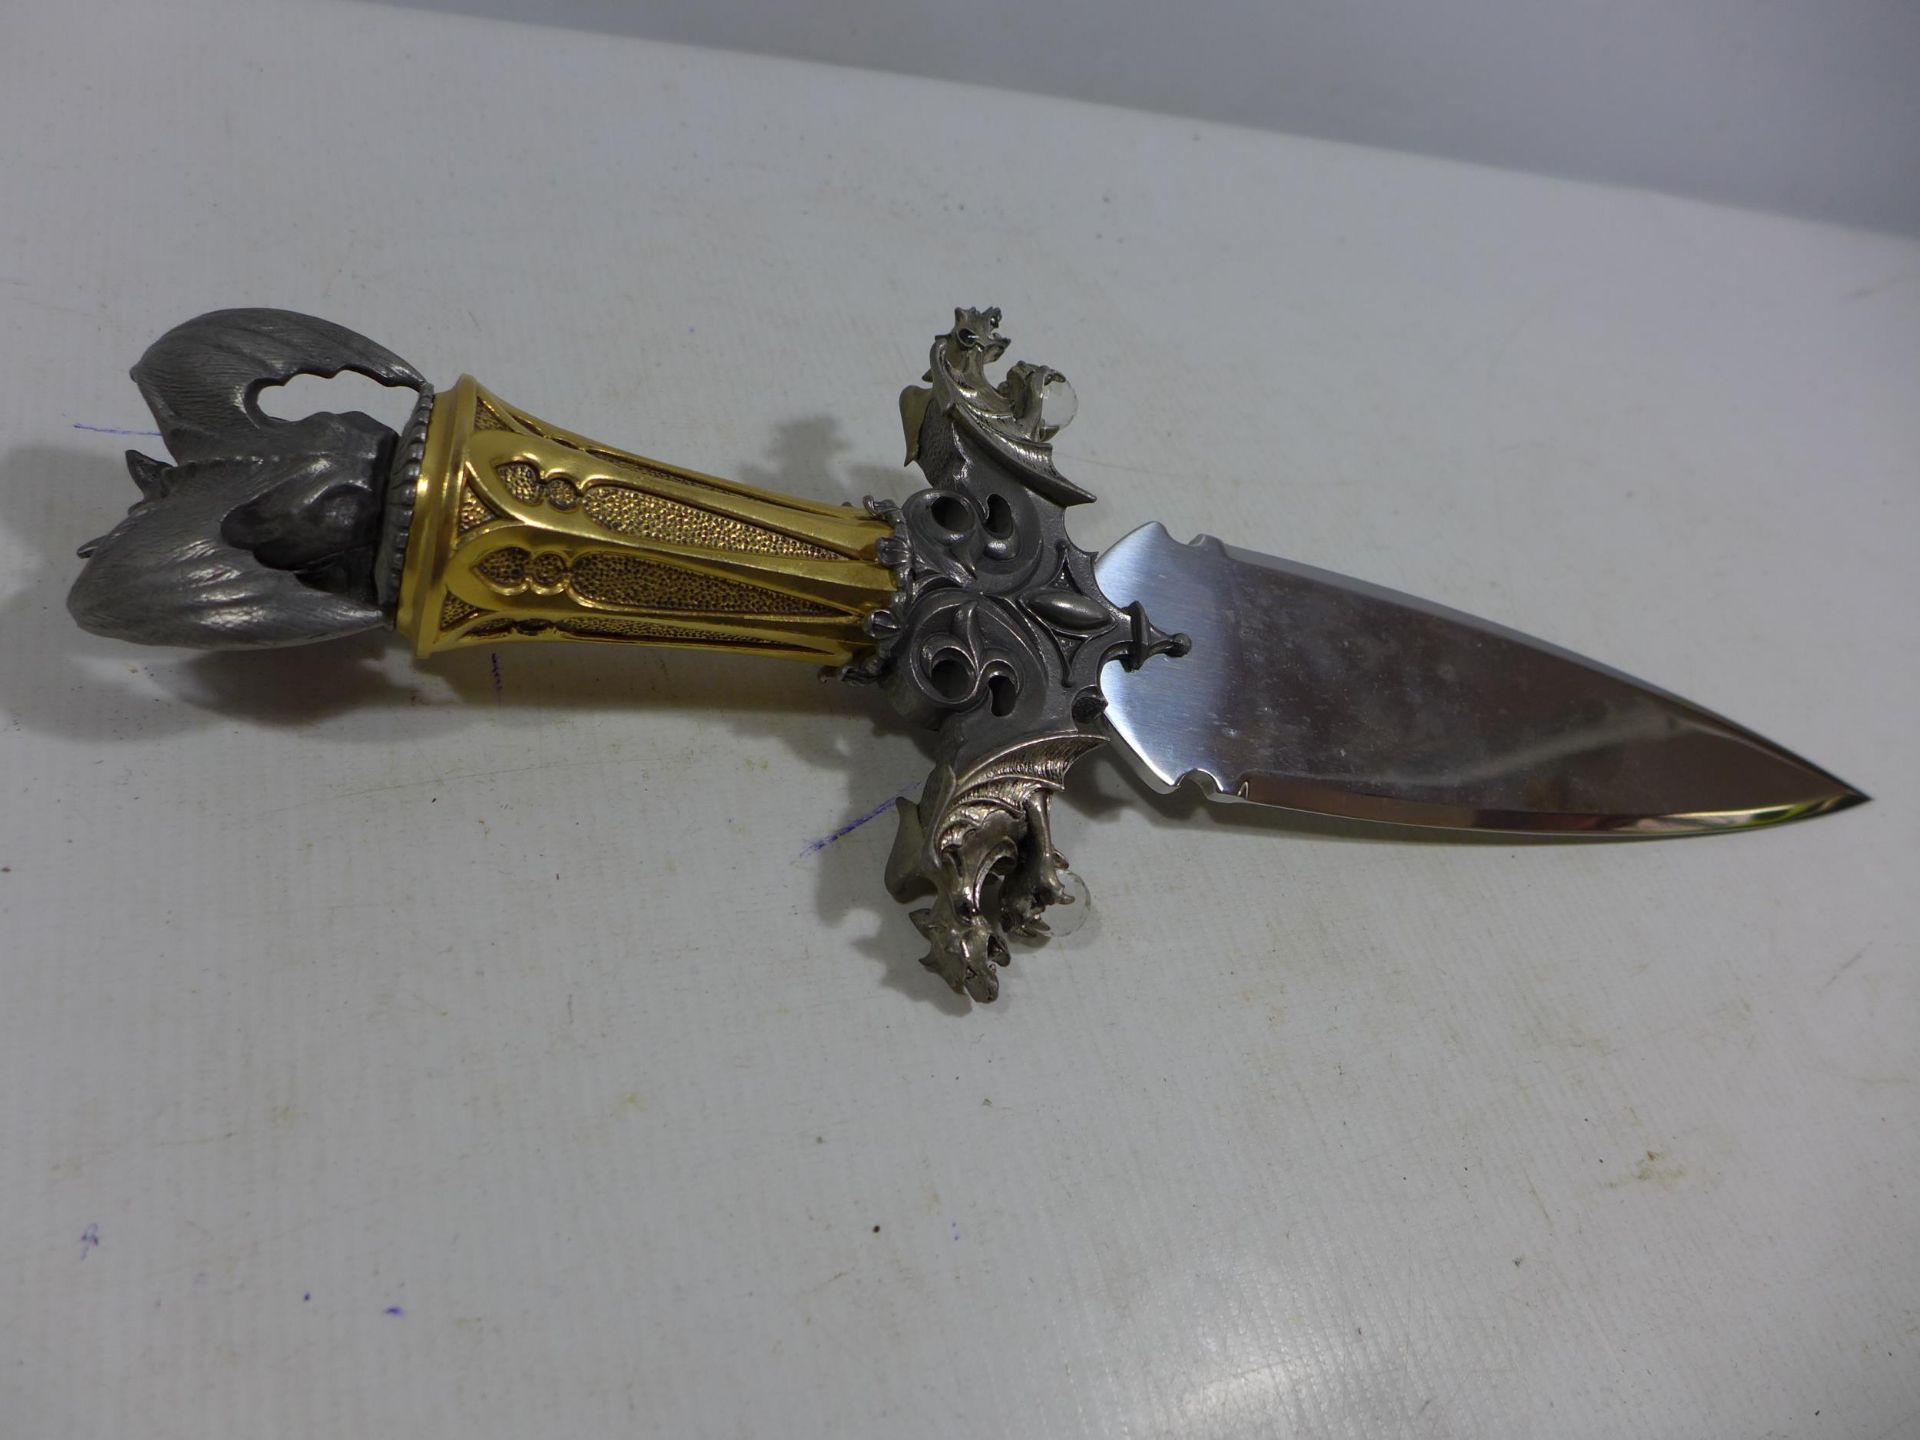 A FANTASY DAGGER MOUNTED ON A WOODEN FRAME, 22CM DOUBLE EDGED BLADE, GRIP WITH DRAGONS HOLDING - Image 4 of 8